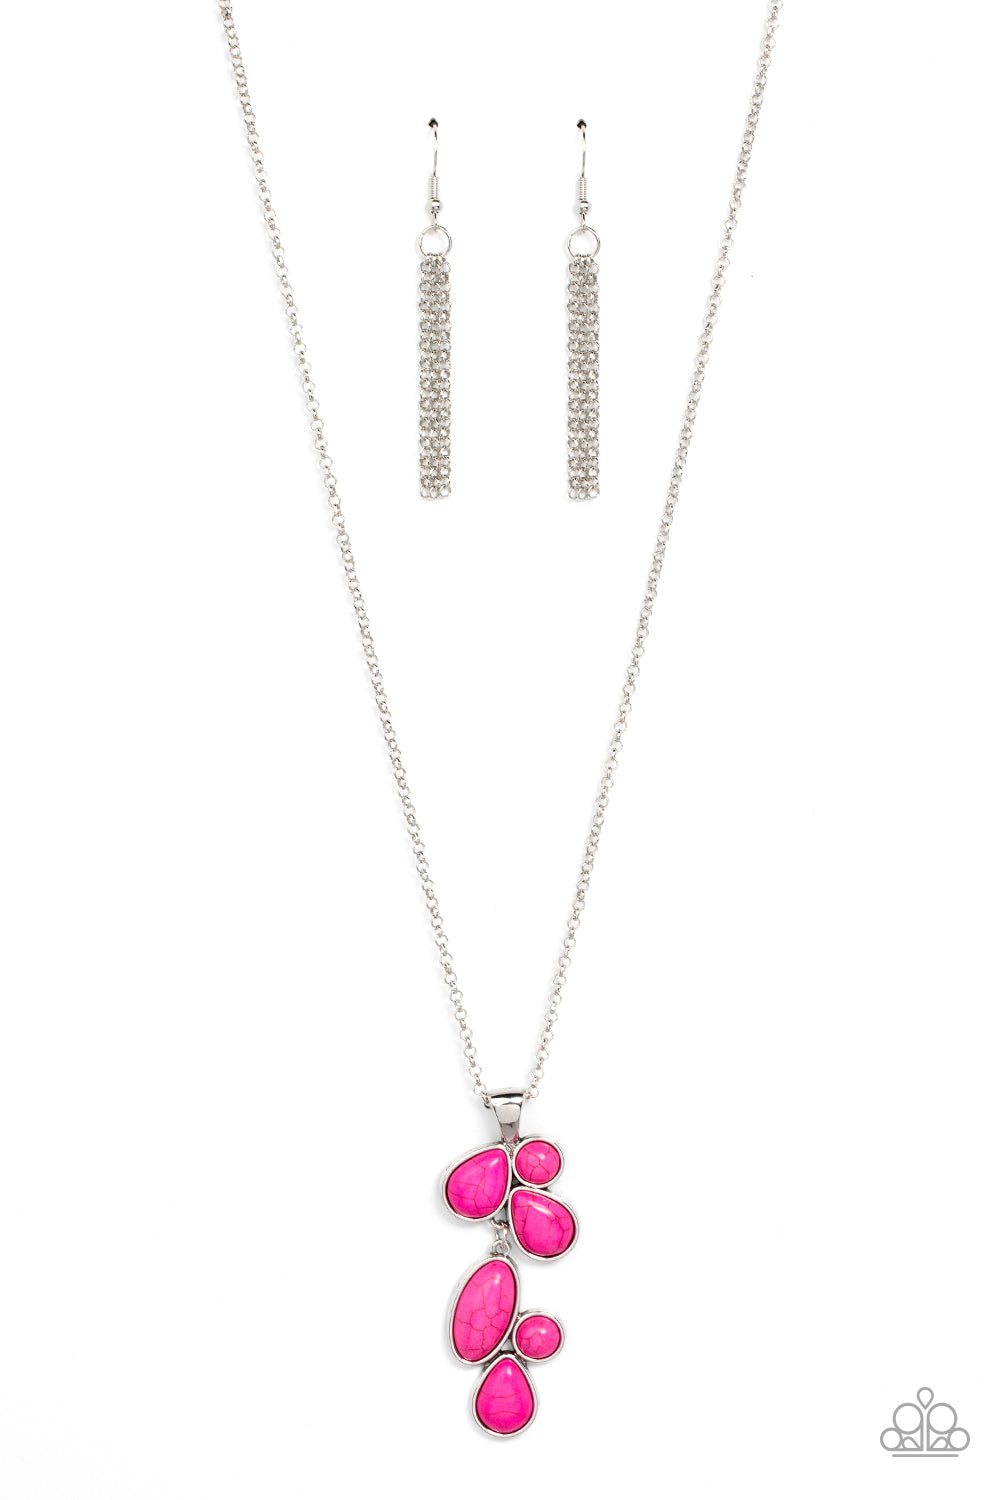 Paparazzi Wild Bunch Flair - Pink Necklace